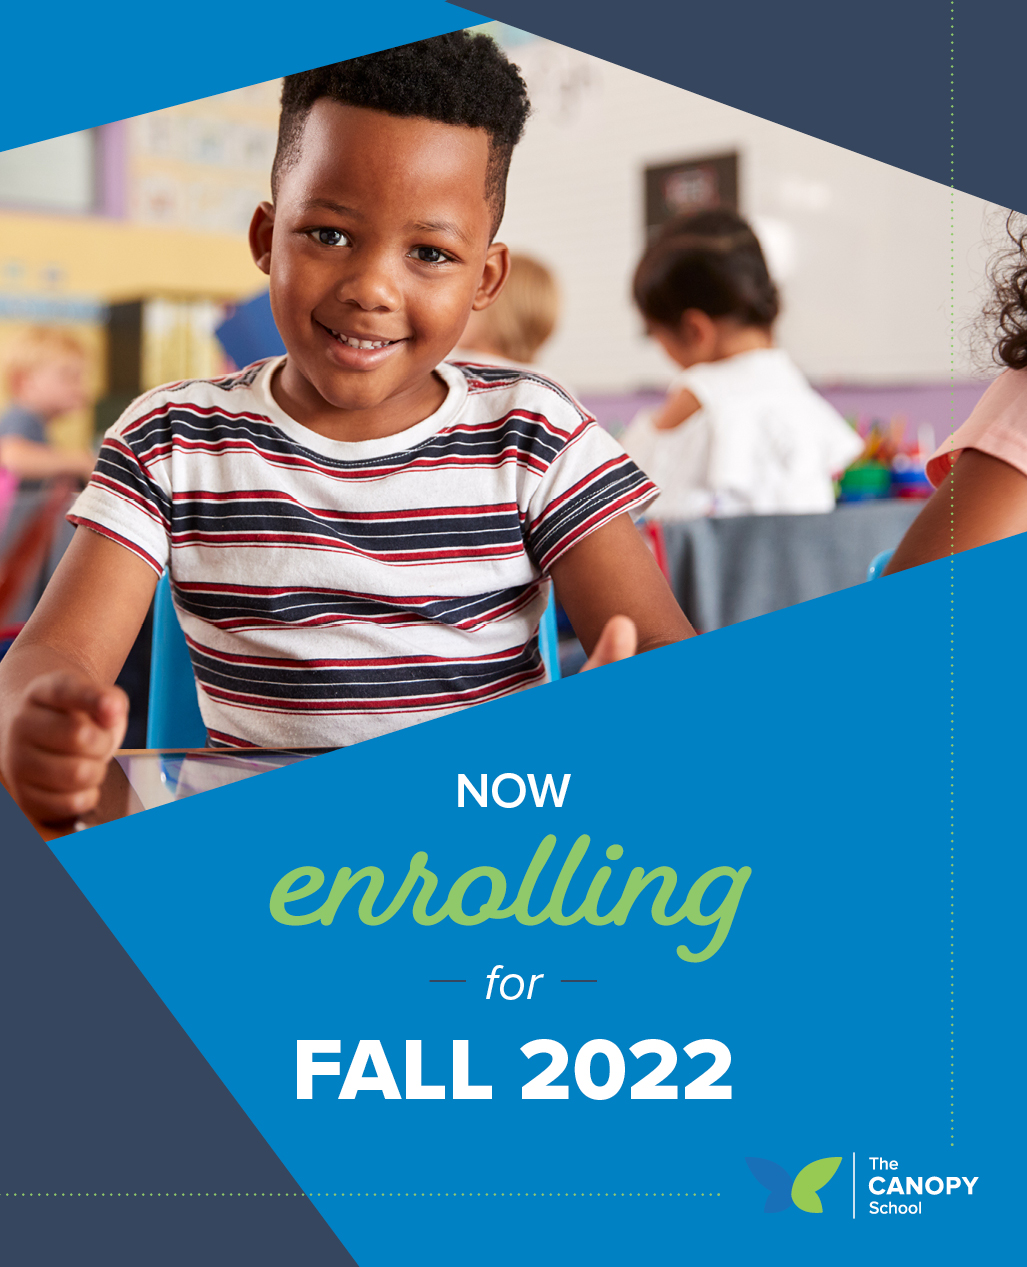 The Canopy School now enrolling for fall 2022